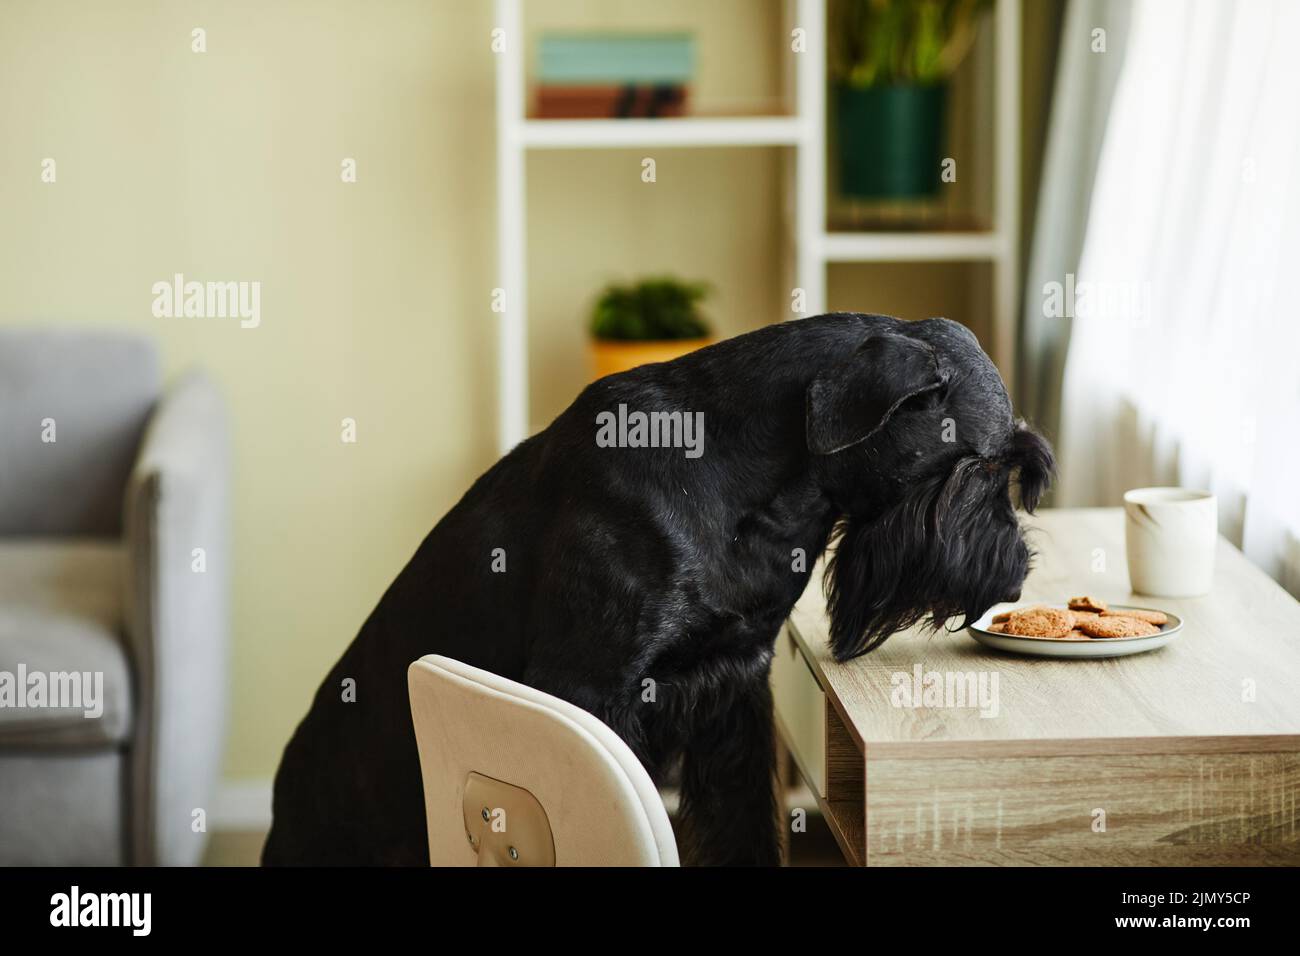 Pampered dog sniffing baked biscuits on plate on table in the room Stock Photo